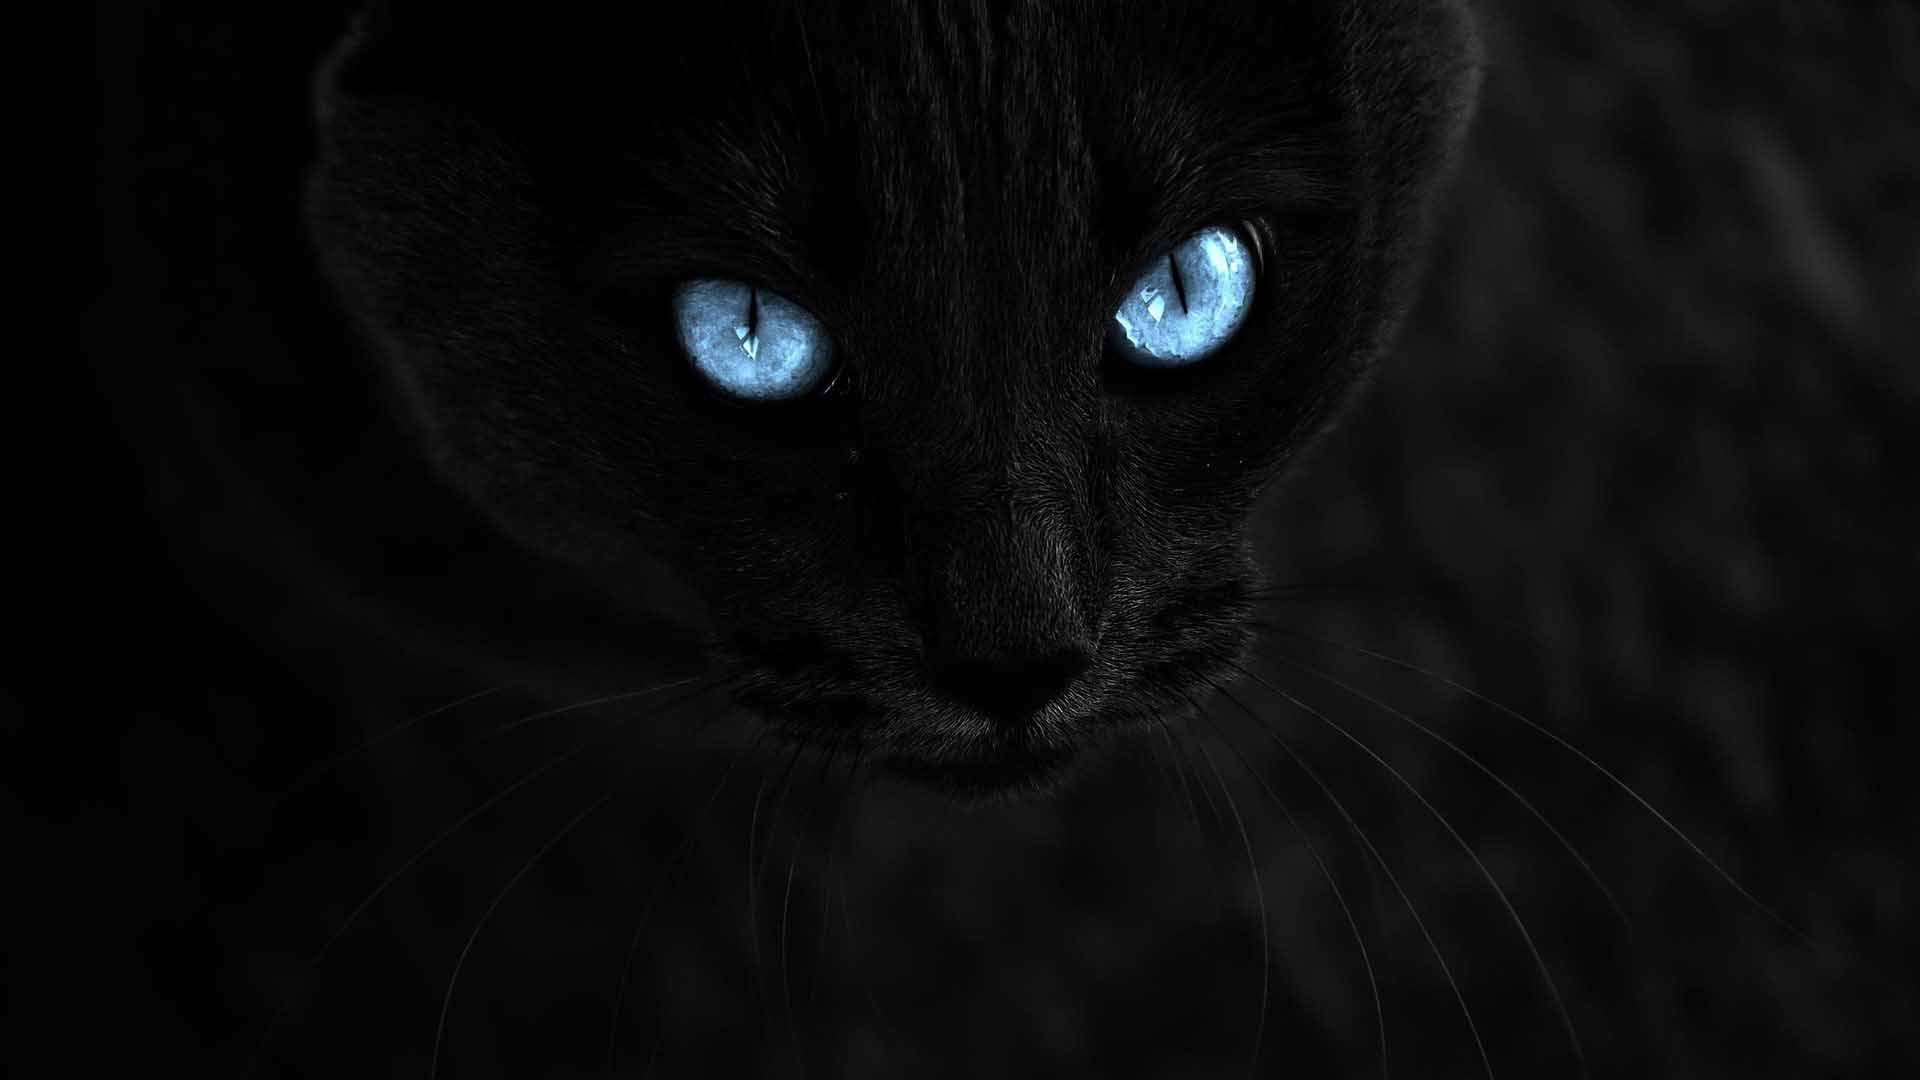 Animals___Cats__Black_cat_with_blue_eyes_on_a_black_background_044856_.jpg